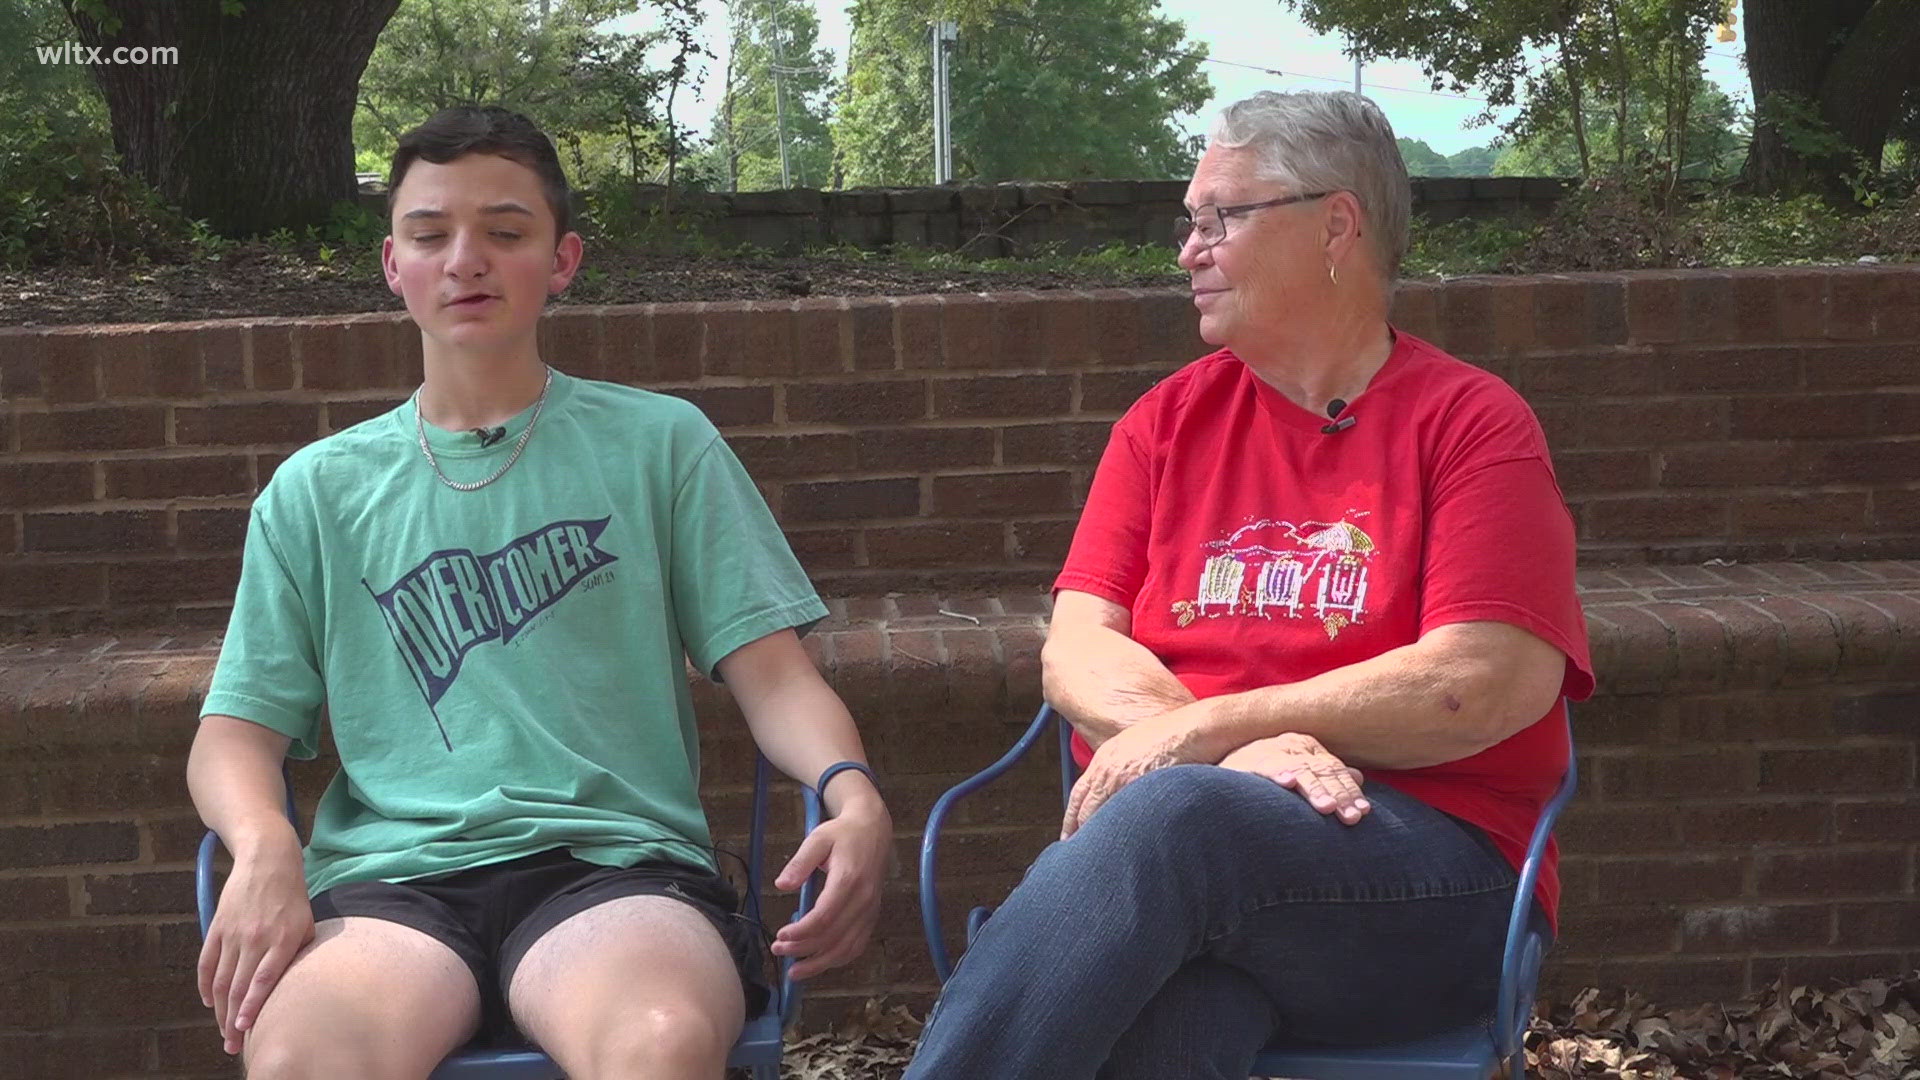 Daniel Adney, a 13-year-old from Sumter County, has made a remarkable recovery after a devastating stroke.